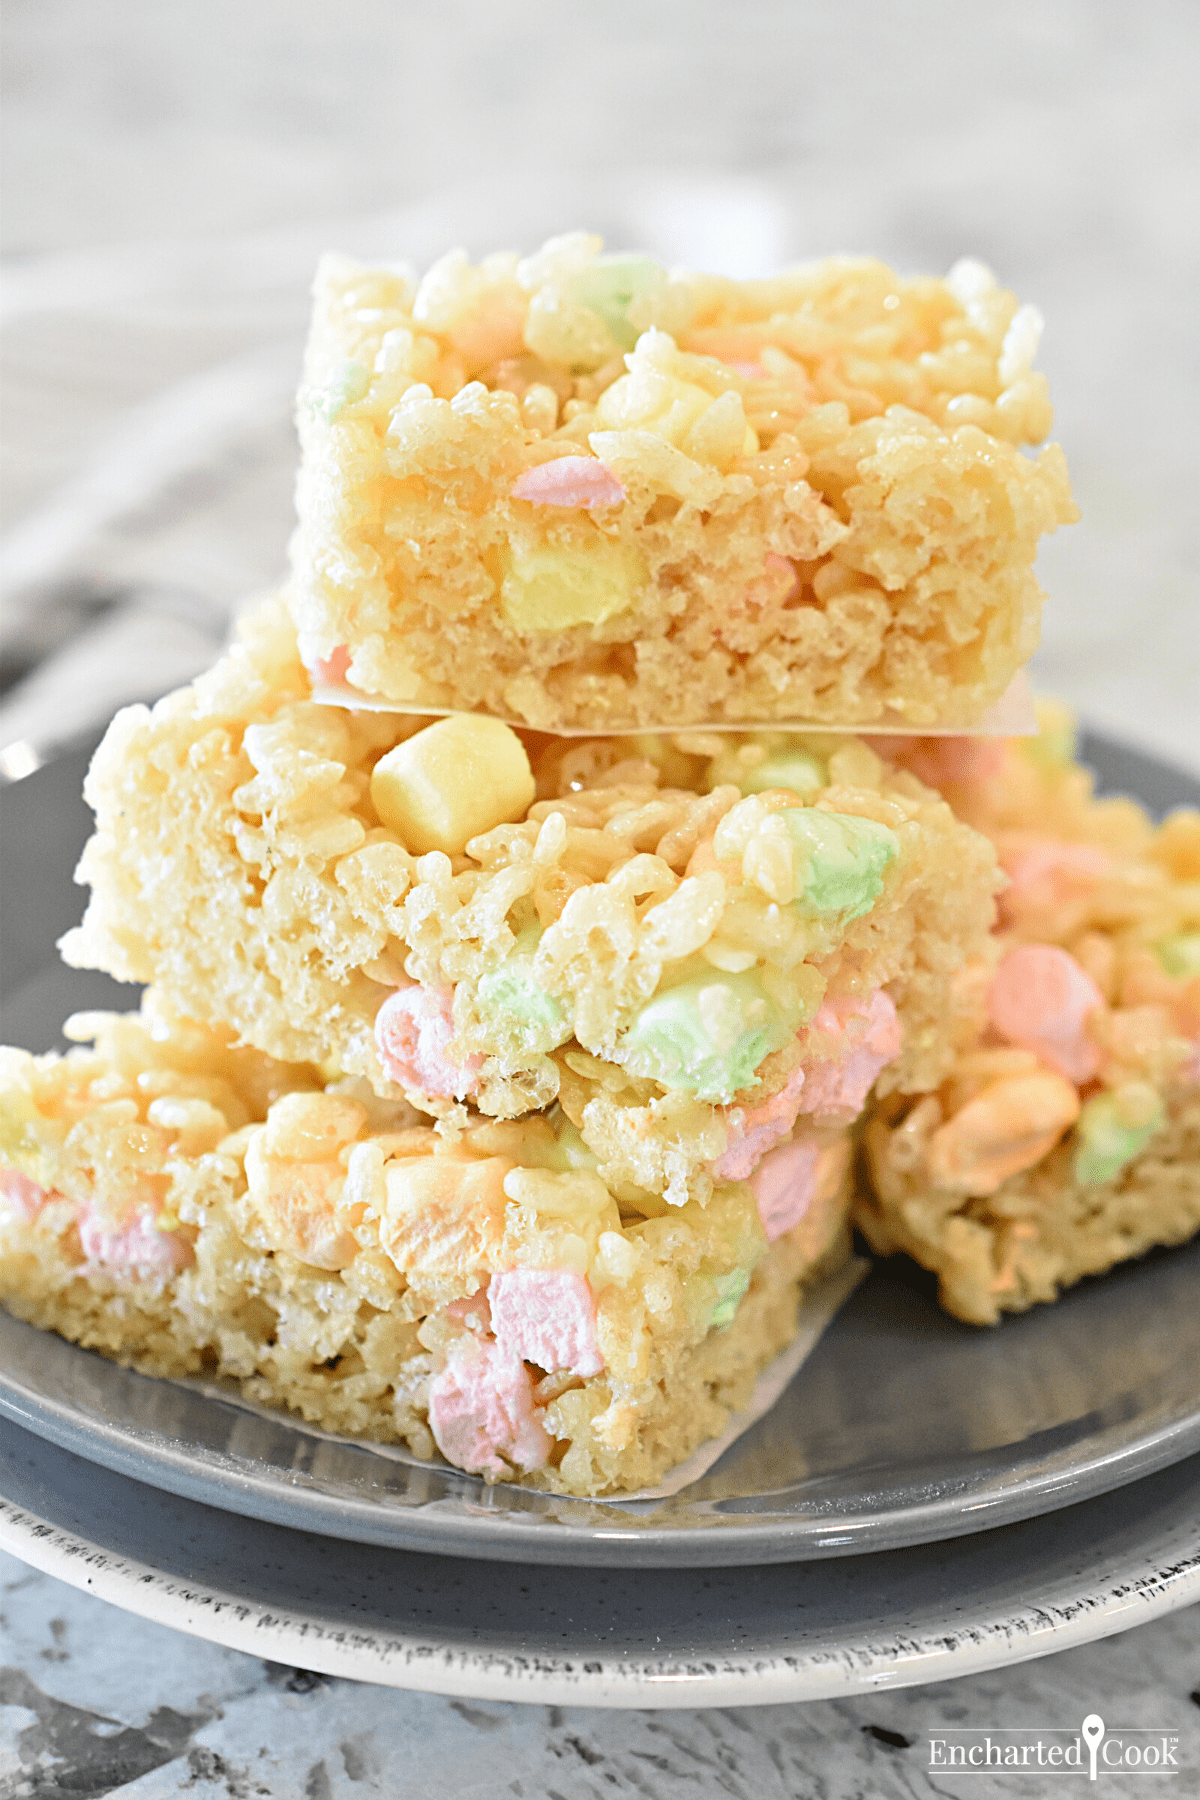 Squares of krispie treats are stacked on a grey plate.